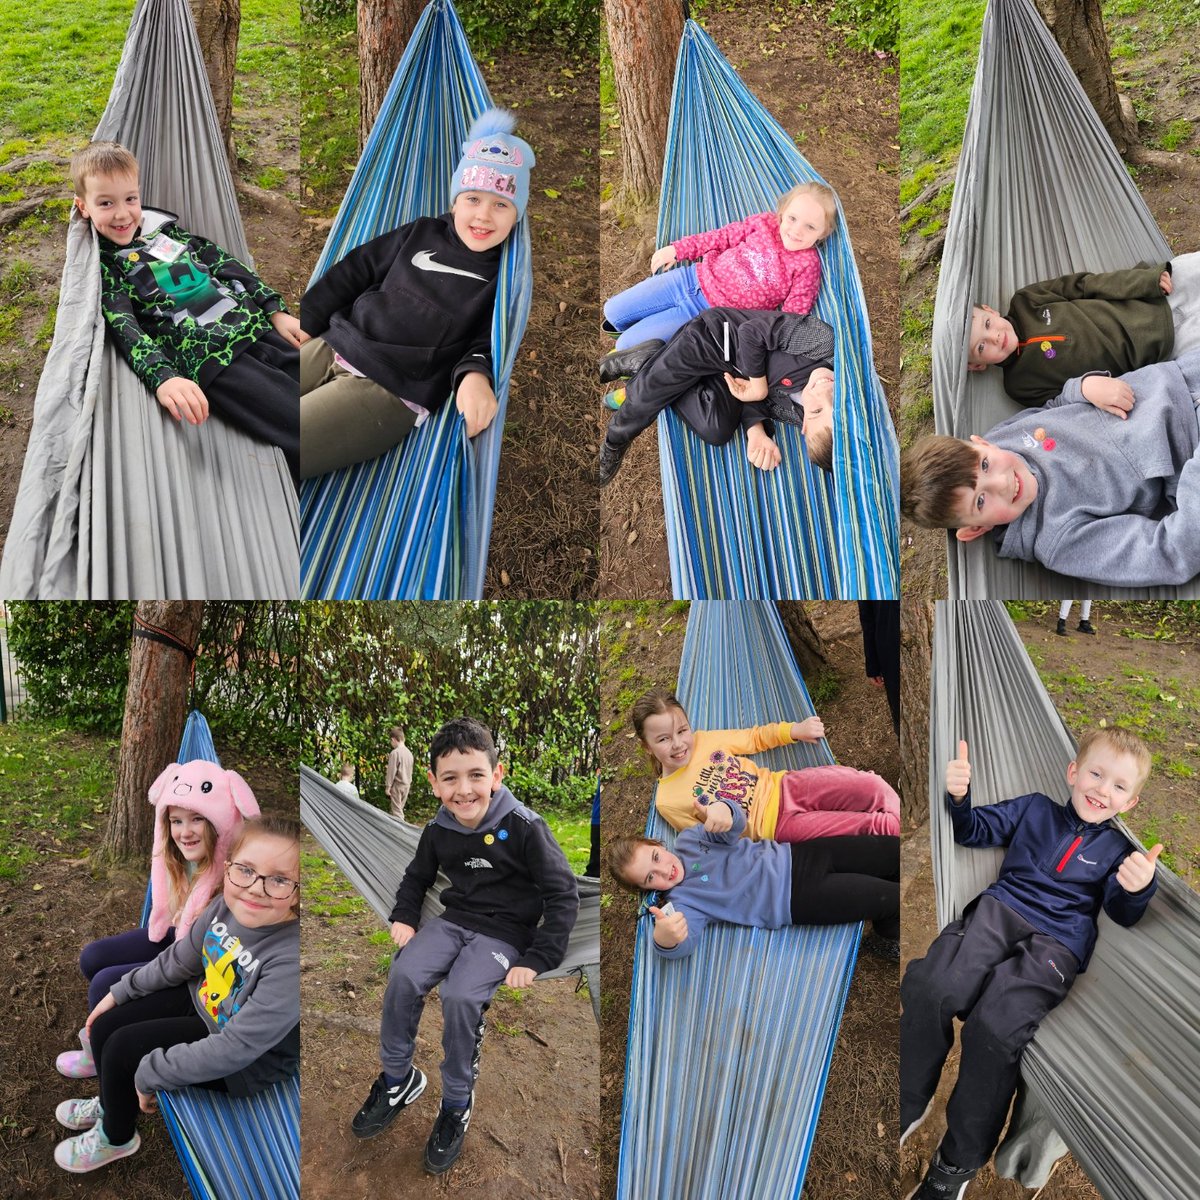 We really enjoyed learning how to put up the hammocks this week in Forest School. @MissKJonesYMG @MissWilliamsYMG